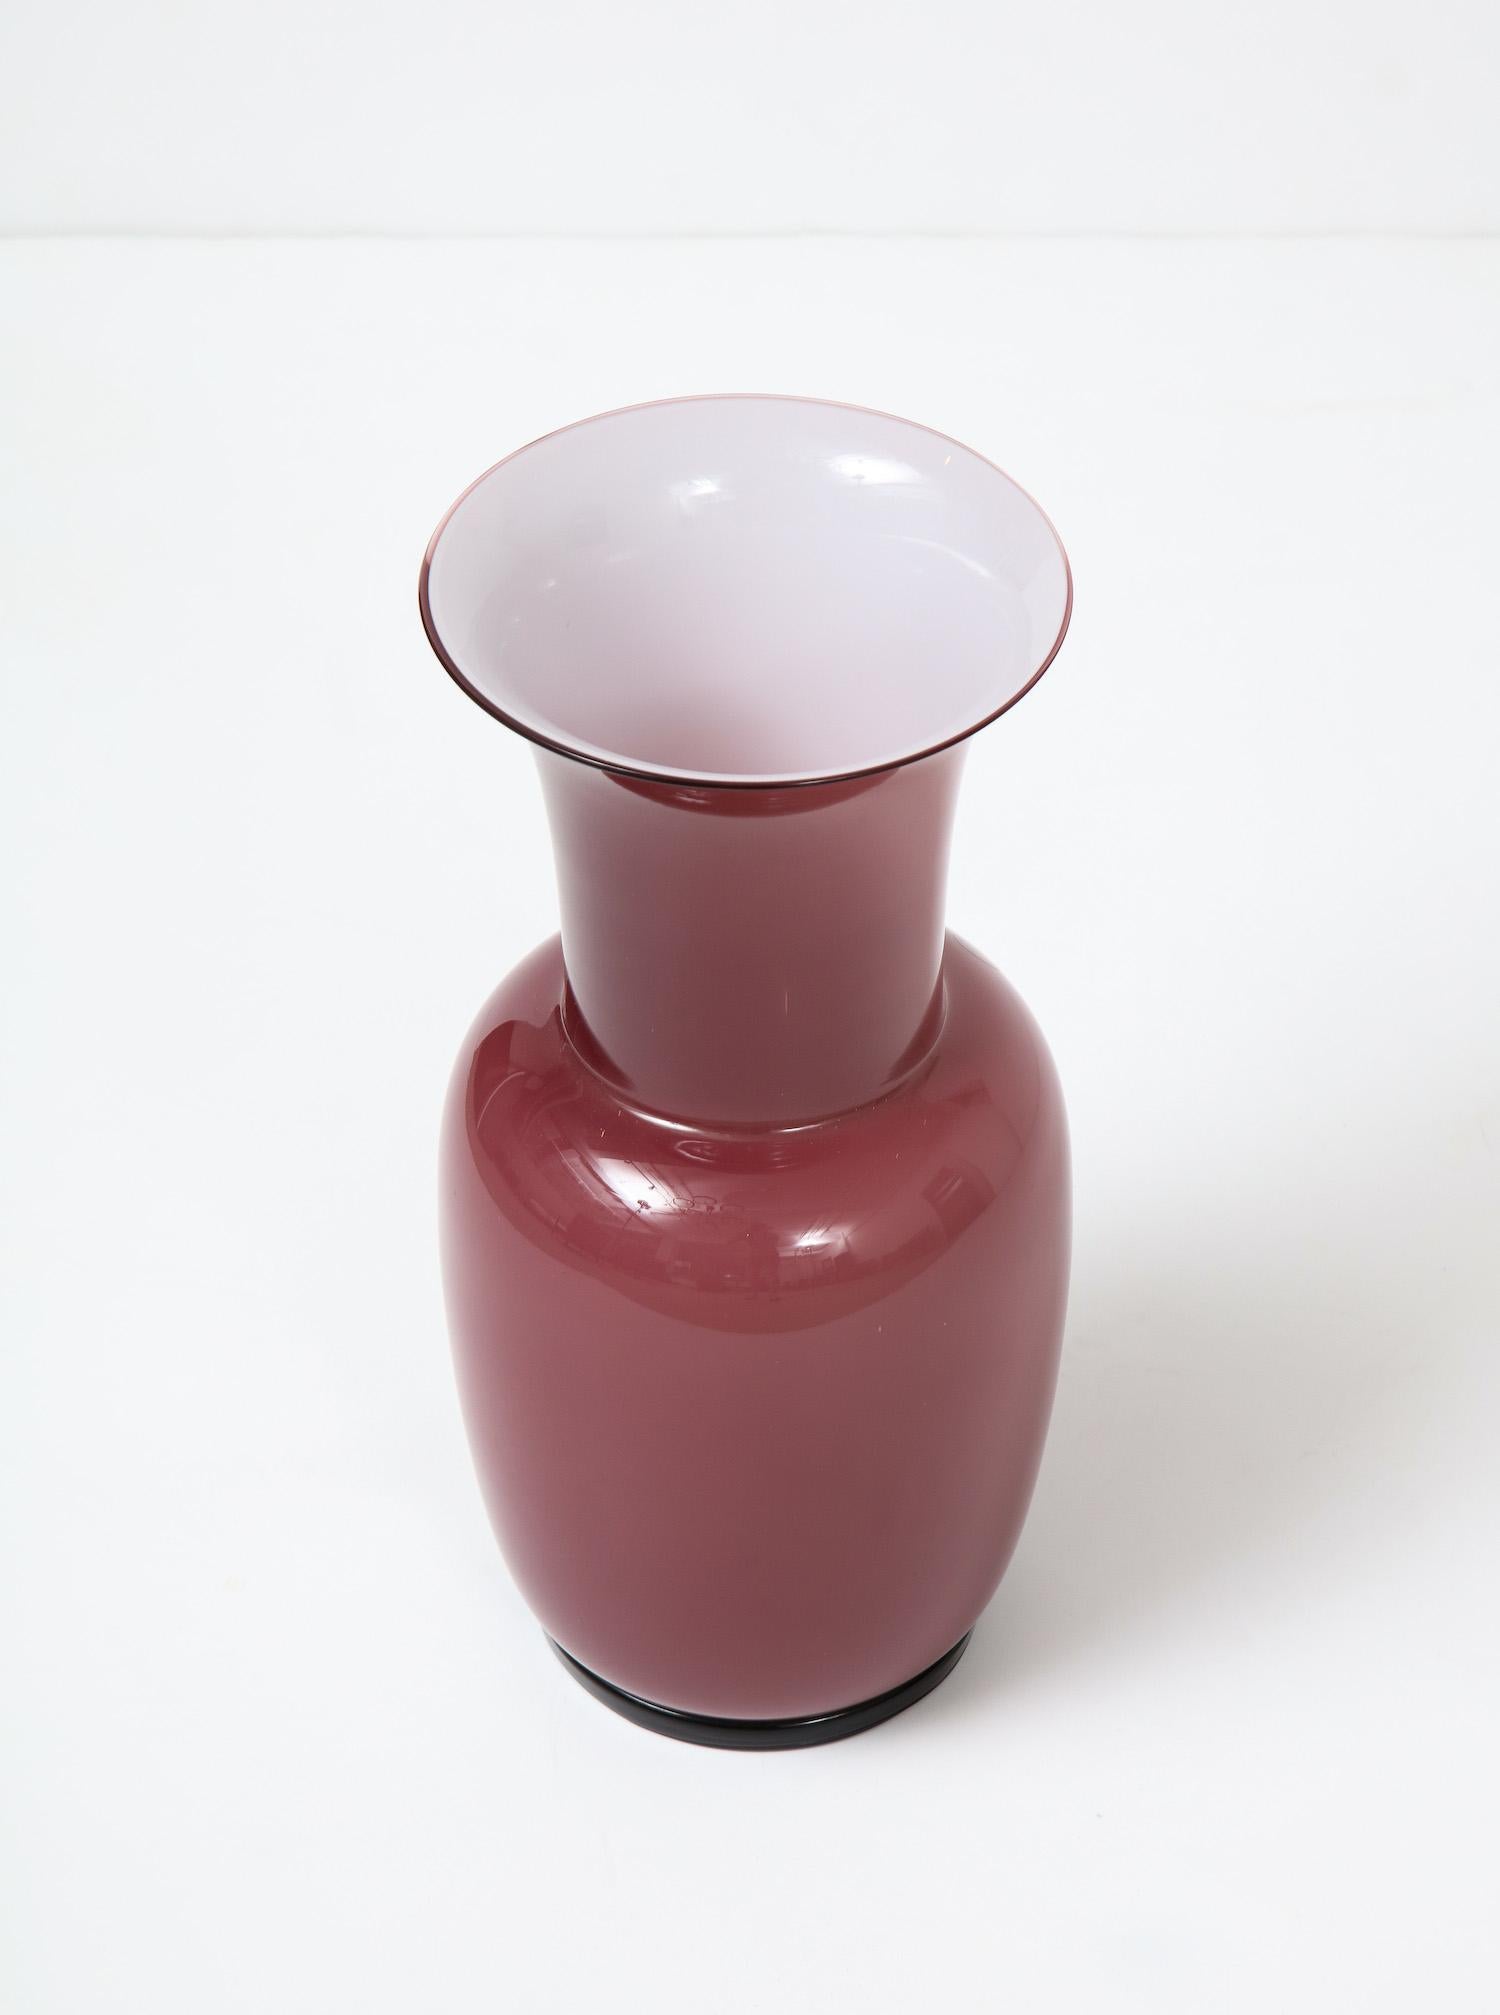 “Incamiciato” vase by Tomaso Buzzi for Venini, 1933-1984. Designed in the 1930s this example was executed in 1984. Cased-glass vase of mauve exterior and white interior. Hand blown form on a short, footed base. Etched signature and dated underneath,